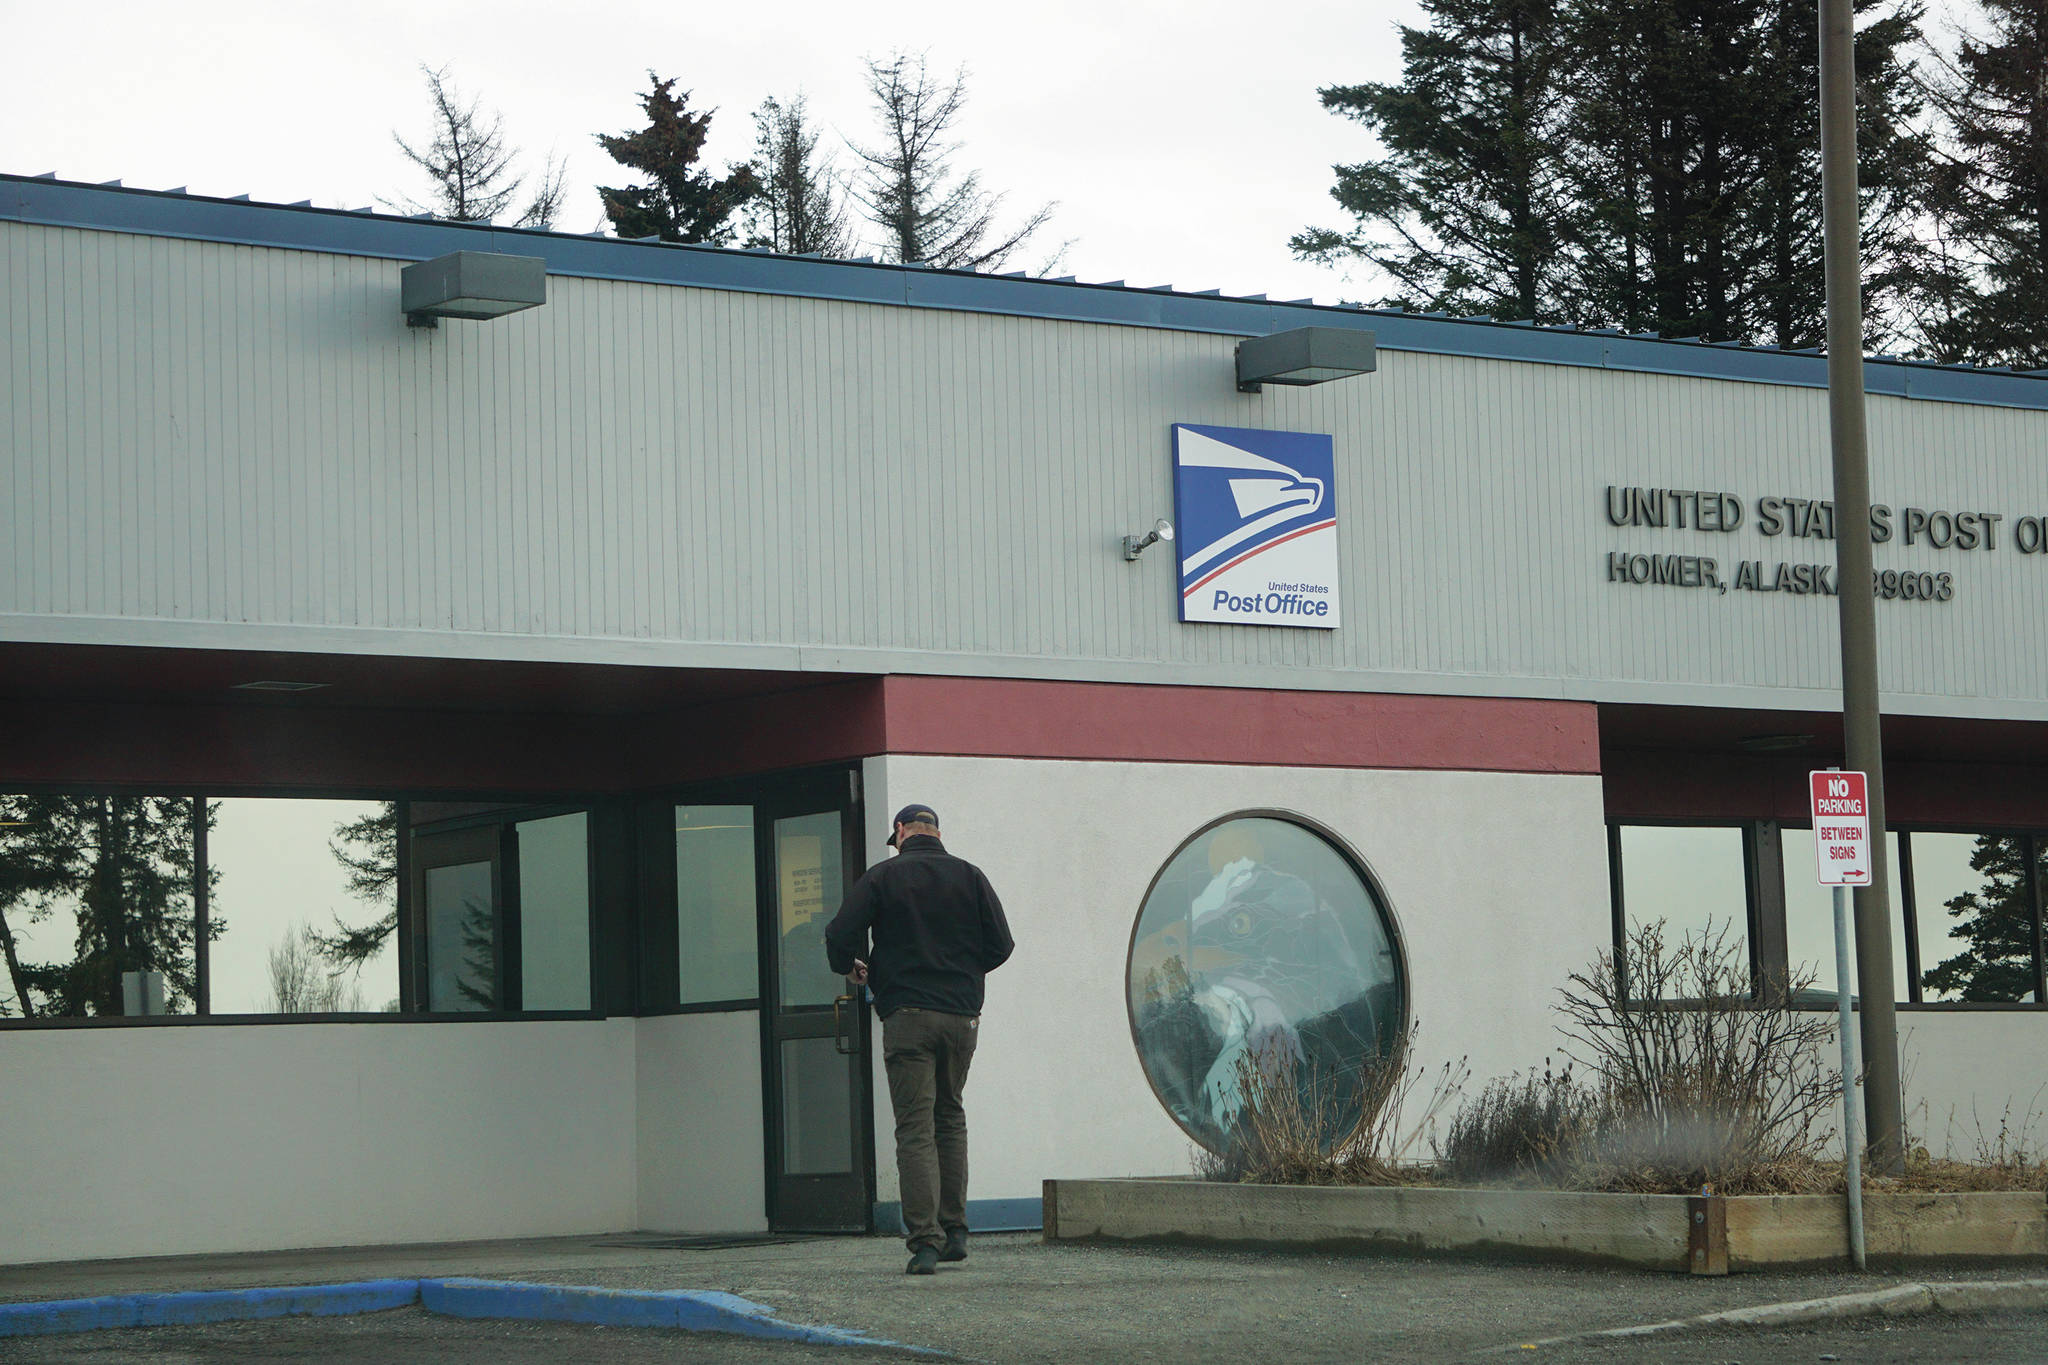 A man enters the Homer Post Office on Thursday, Jan. 21, 2021, in Homer, Alaska. On Jan. 20, 2021, President Joe Biden issued an executive order directing that federal employees and people in federal buildings should all wear masks. (Photo by Michael Armstrong/Homer News)